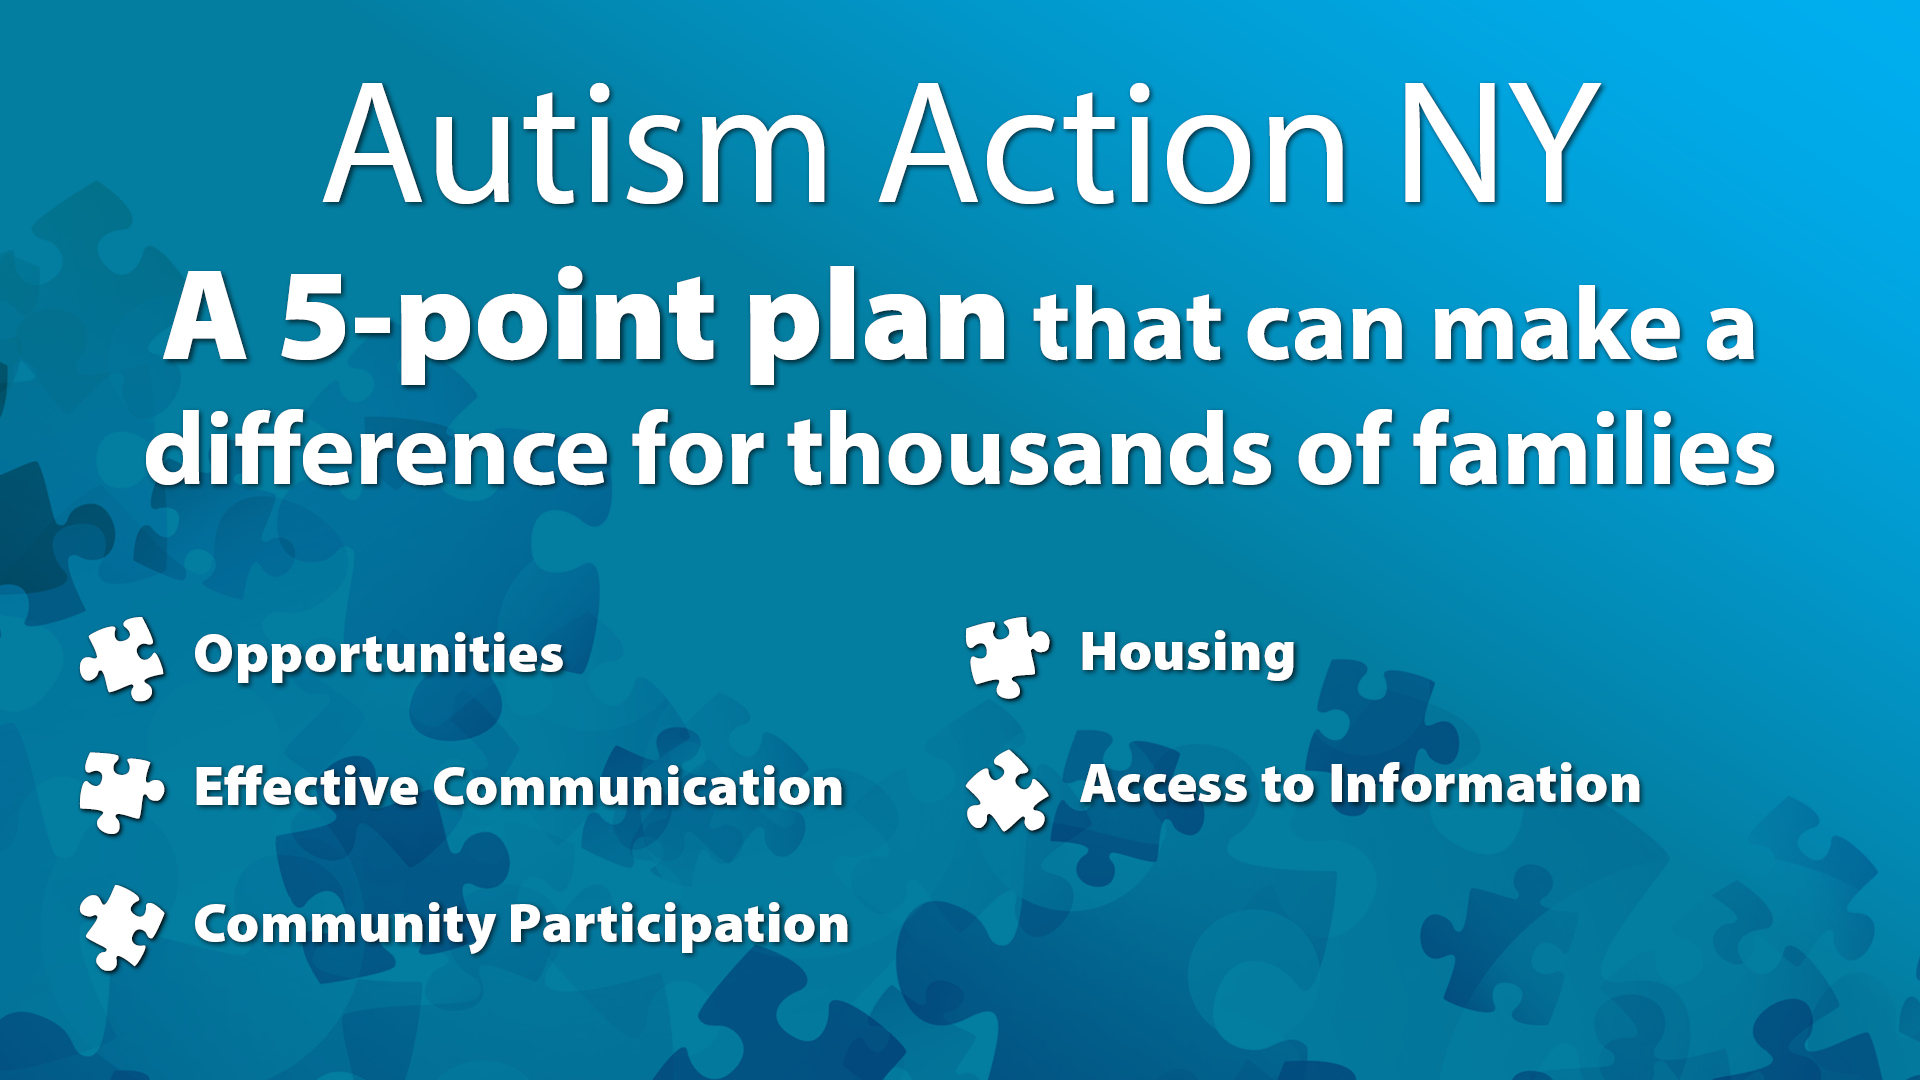 Autism Action NY